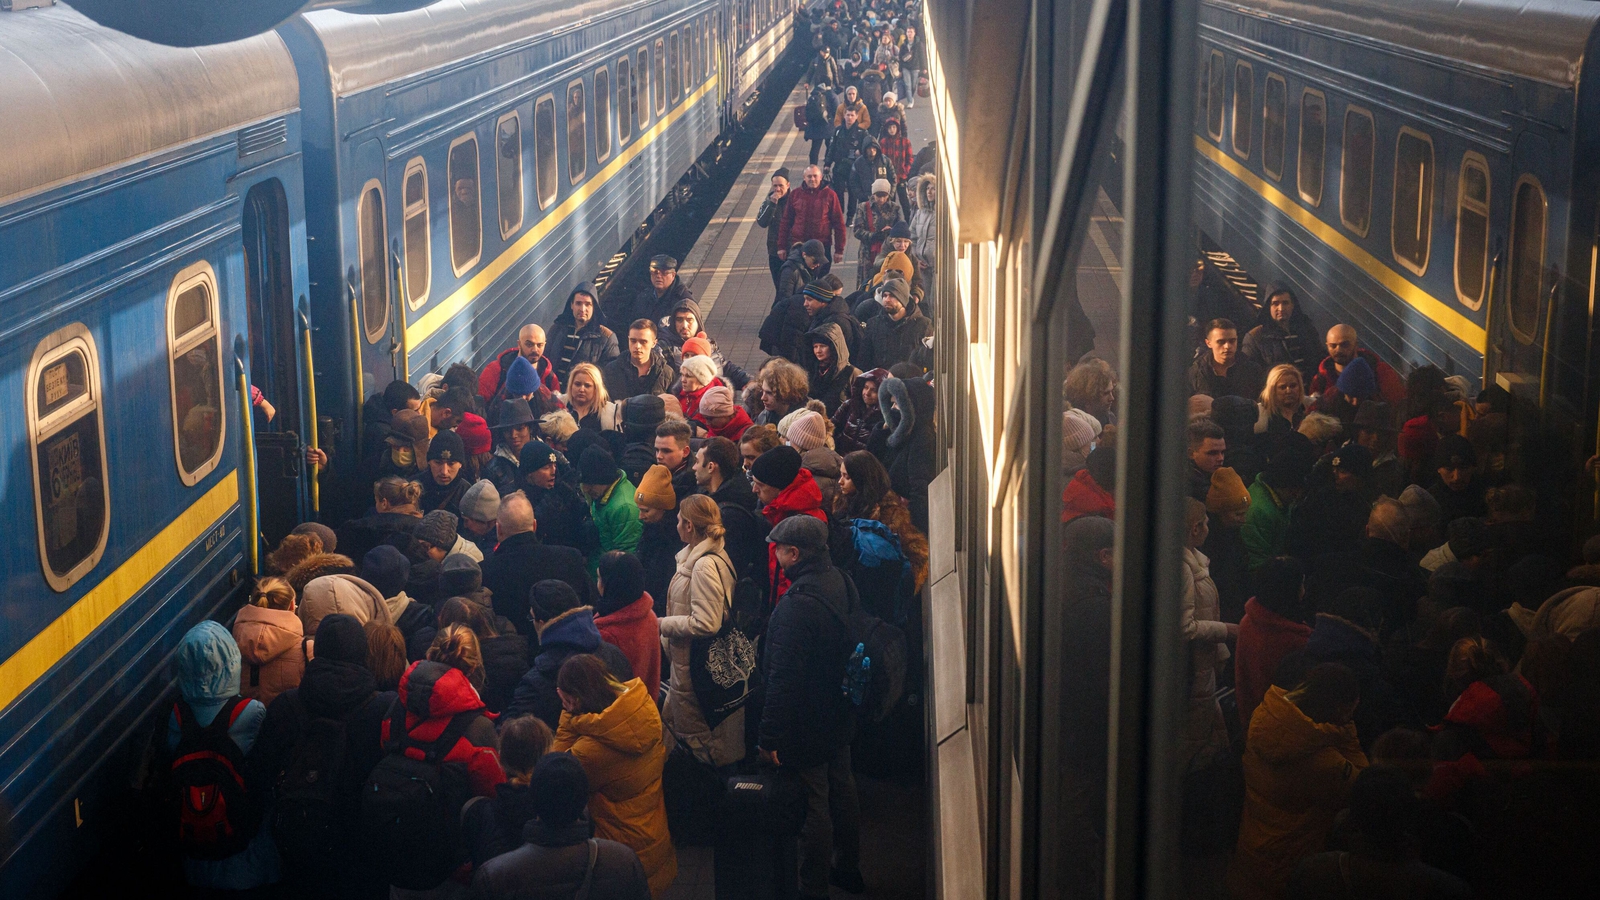 Image - People board an evacuation train at Kyiv central train station on 28 February